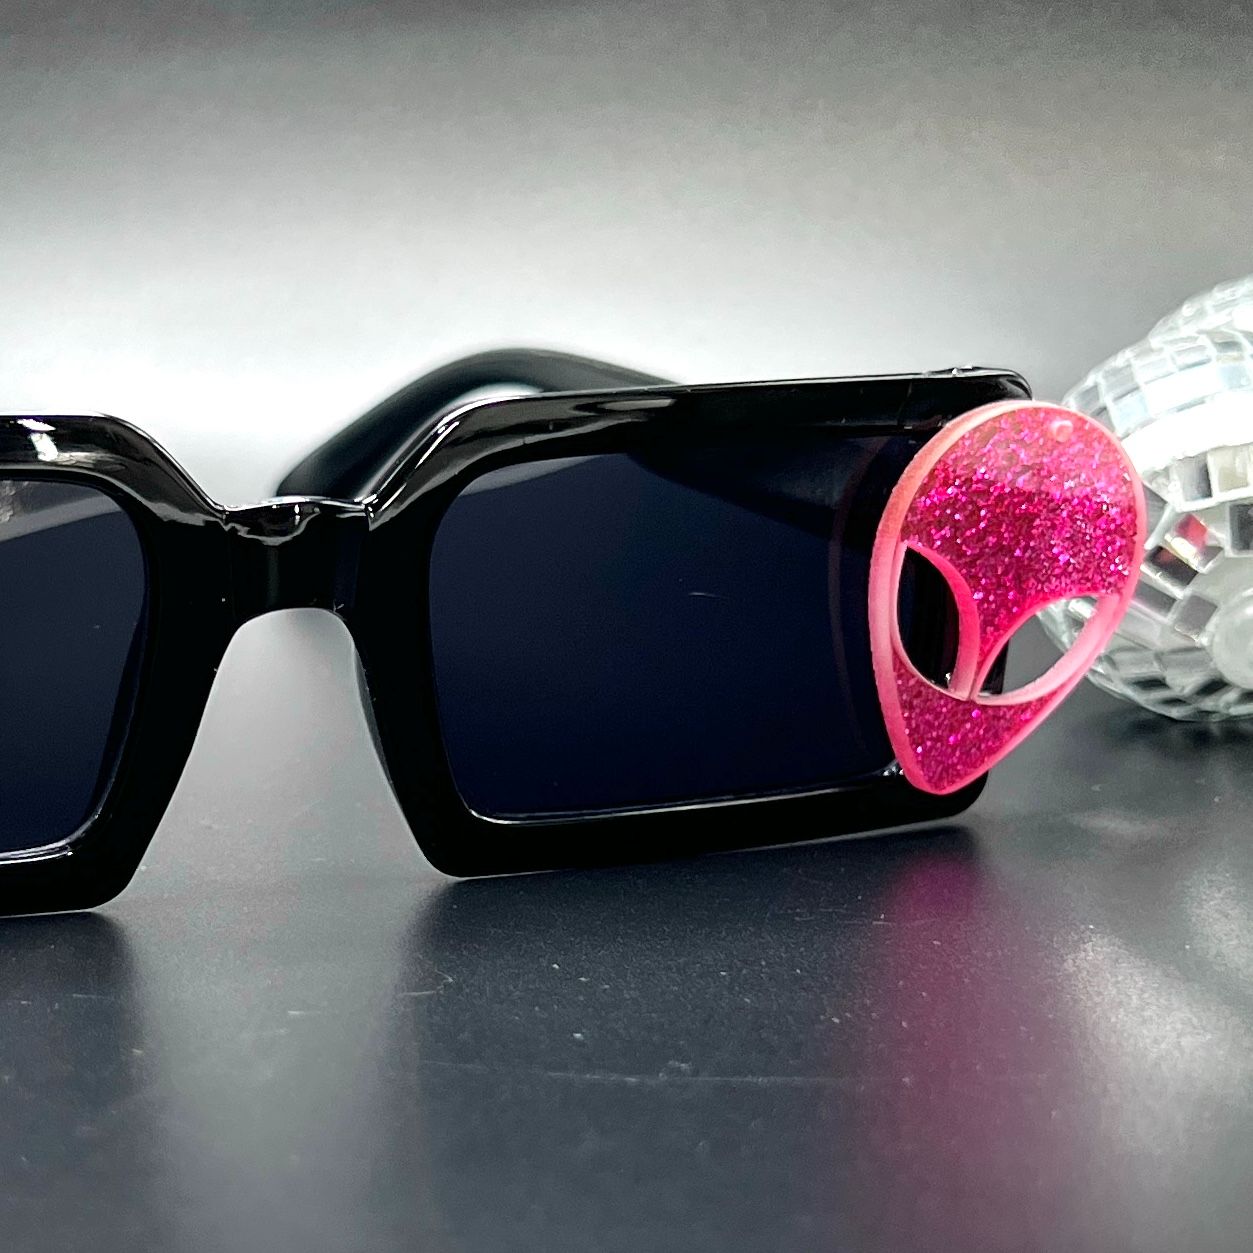 Hot Pink Alien Sunglasses with black frames and glittery pink aliens on sides – a bold and cosmic accessory for festivals and raves. Square/rectangle shape. Displayed on a table. Front view.